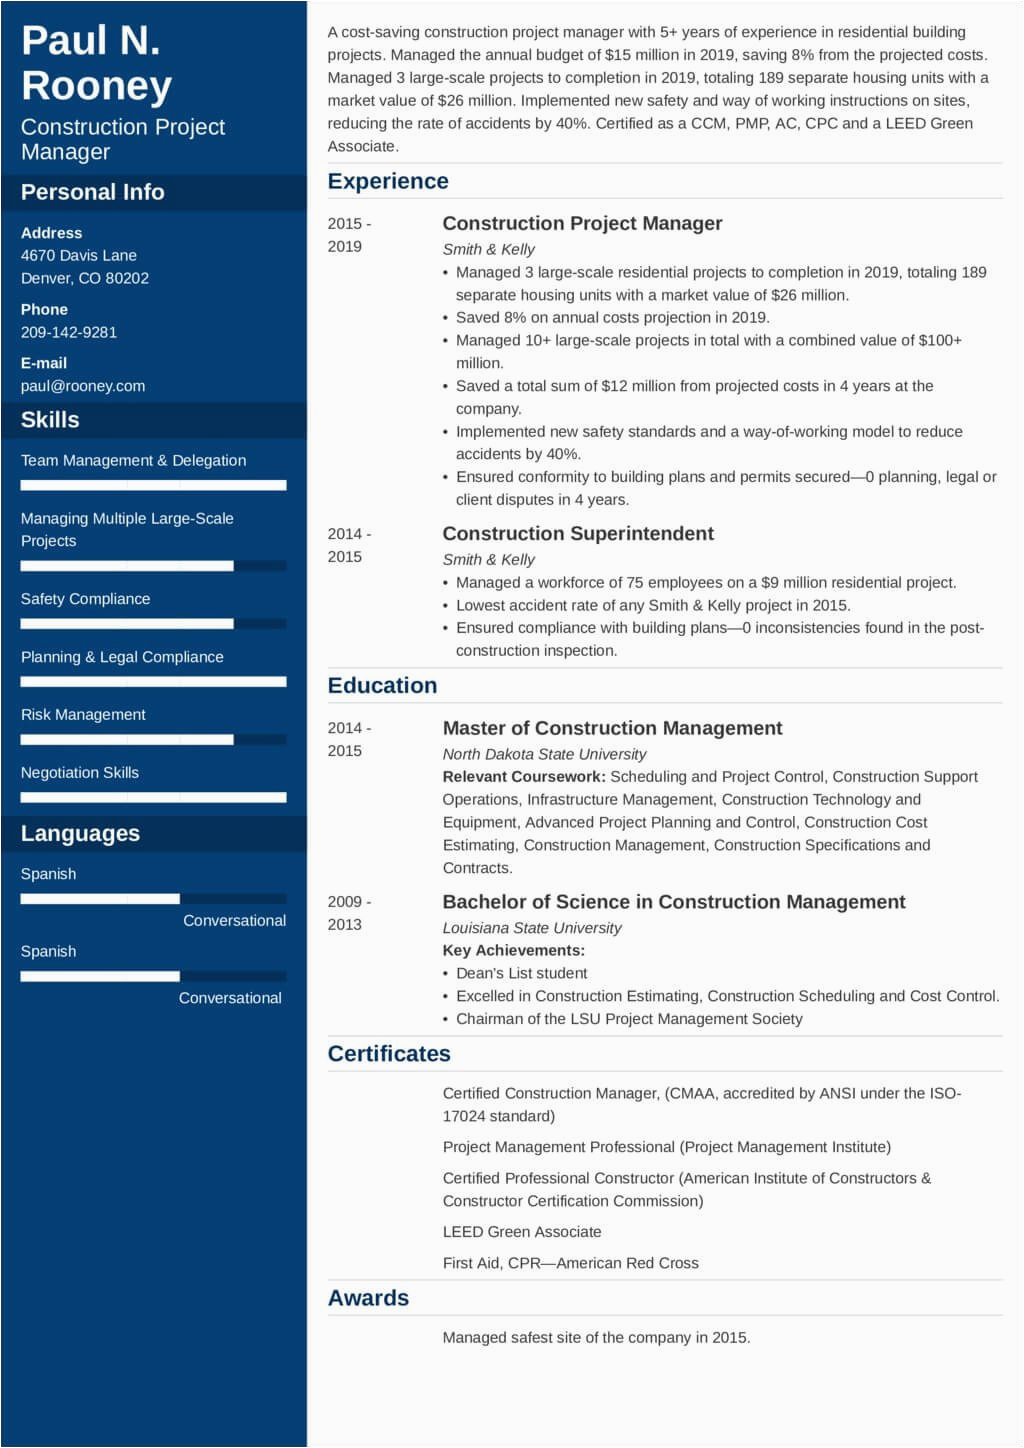 Construction Project Manager Resume Samples Free Construction Project Manager Resume—sample and 25 Tips